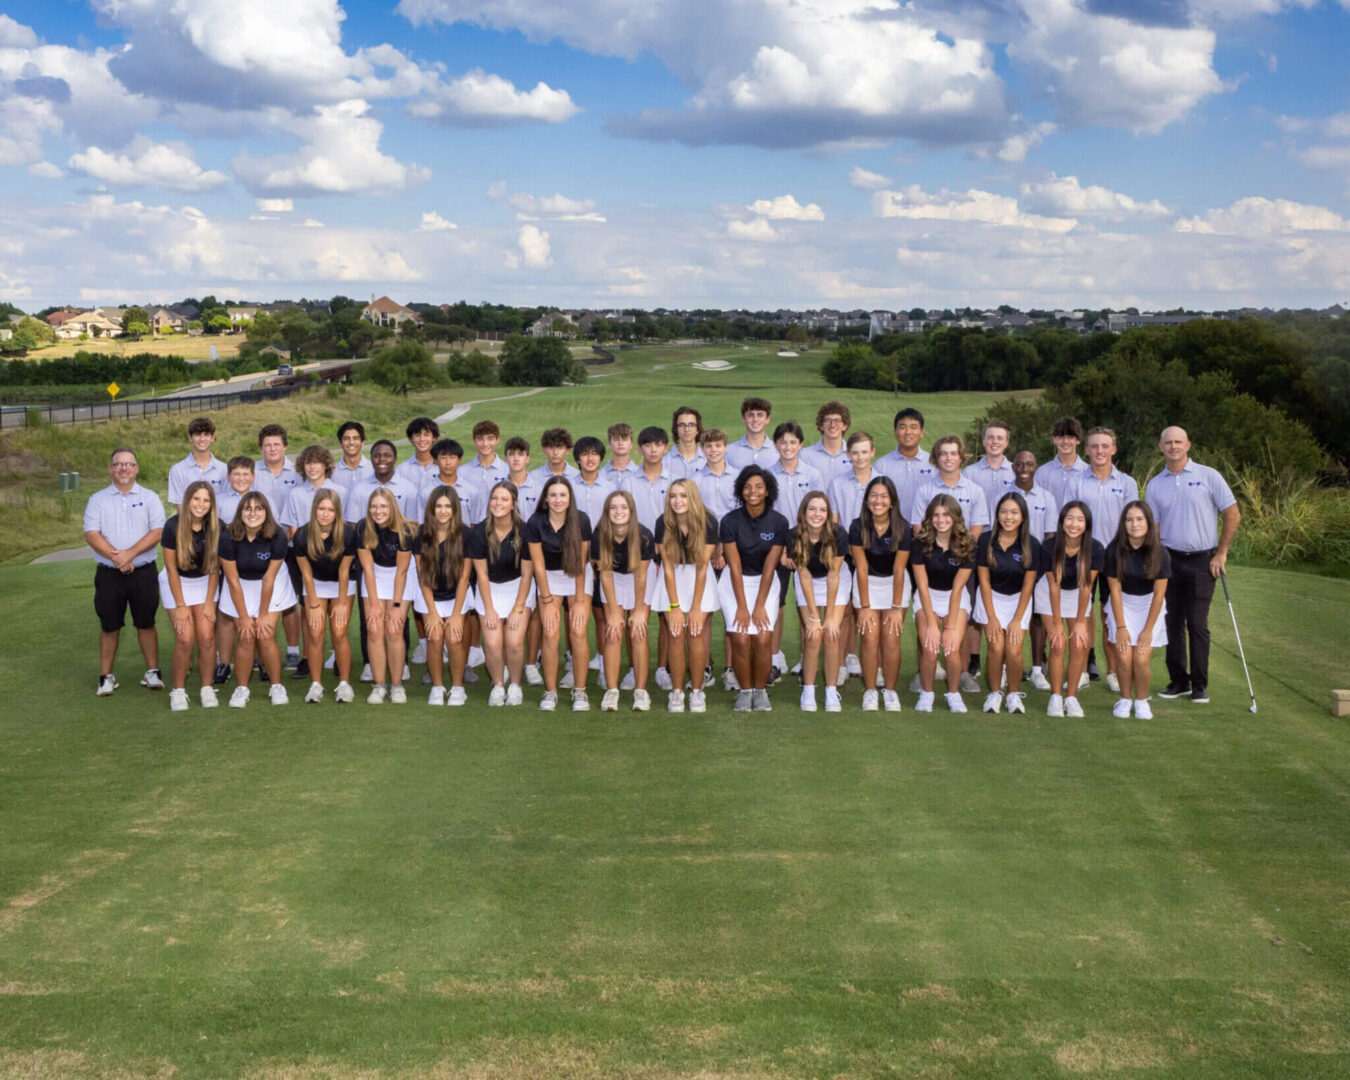 Group photo of boys and girls in a golf course